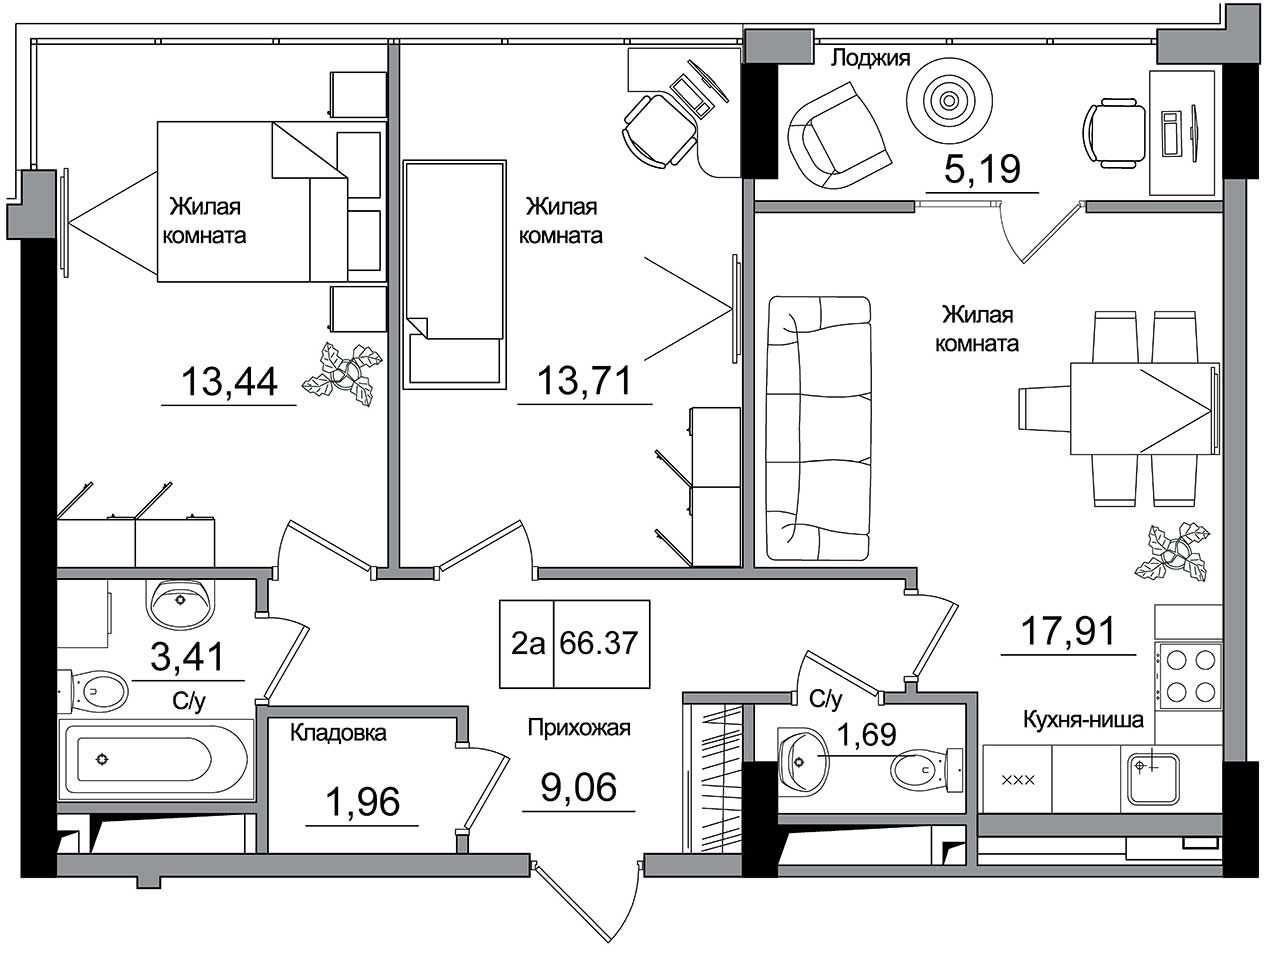 Planning 2-rm flats area 66.37m2, AB-16-04/00006.